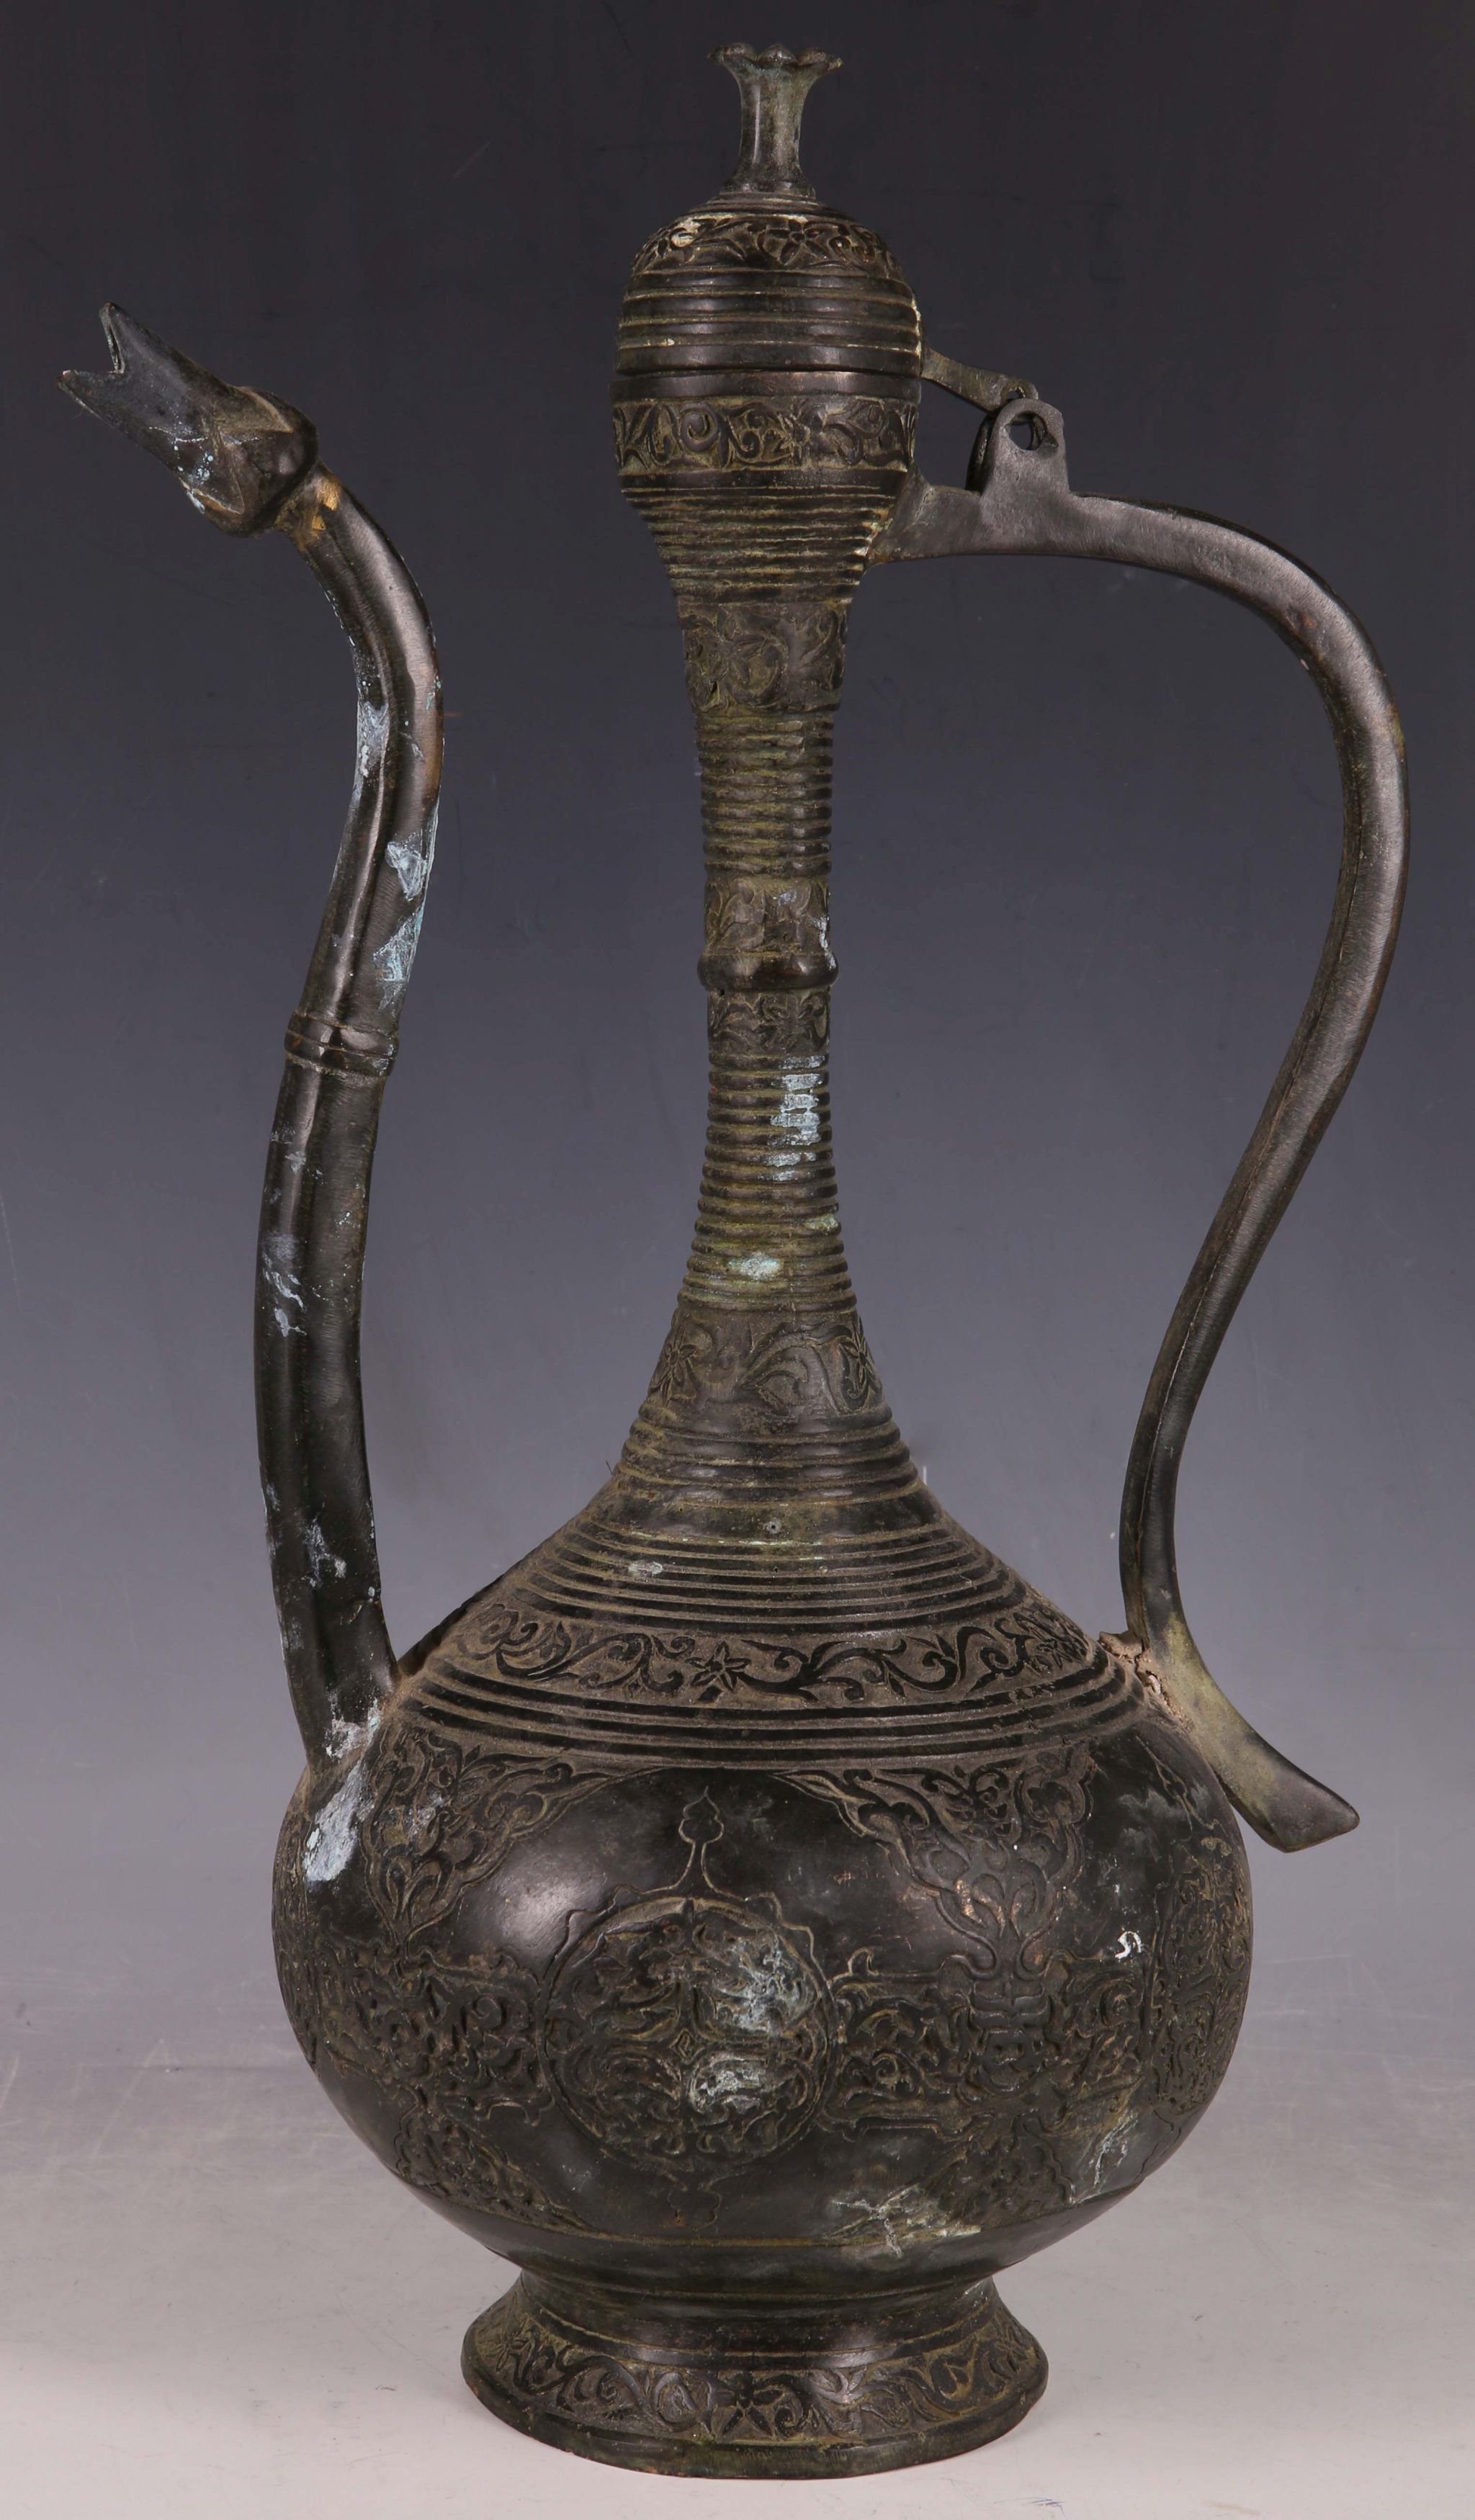 An archaic form Islamic style bronze ewer cast with intricate design, the hinged lid and floral form